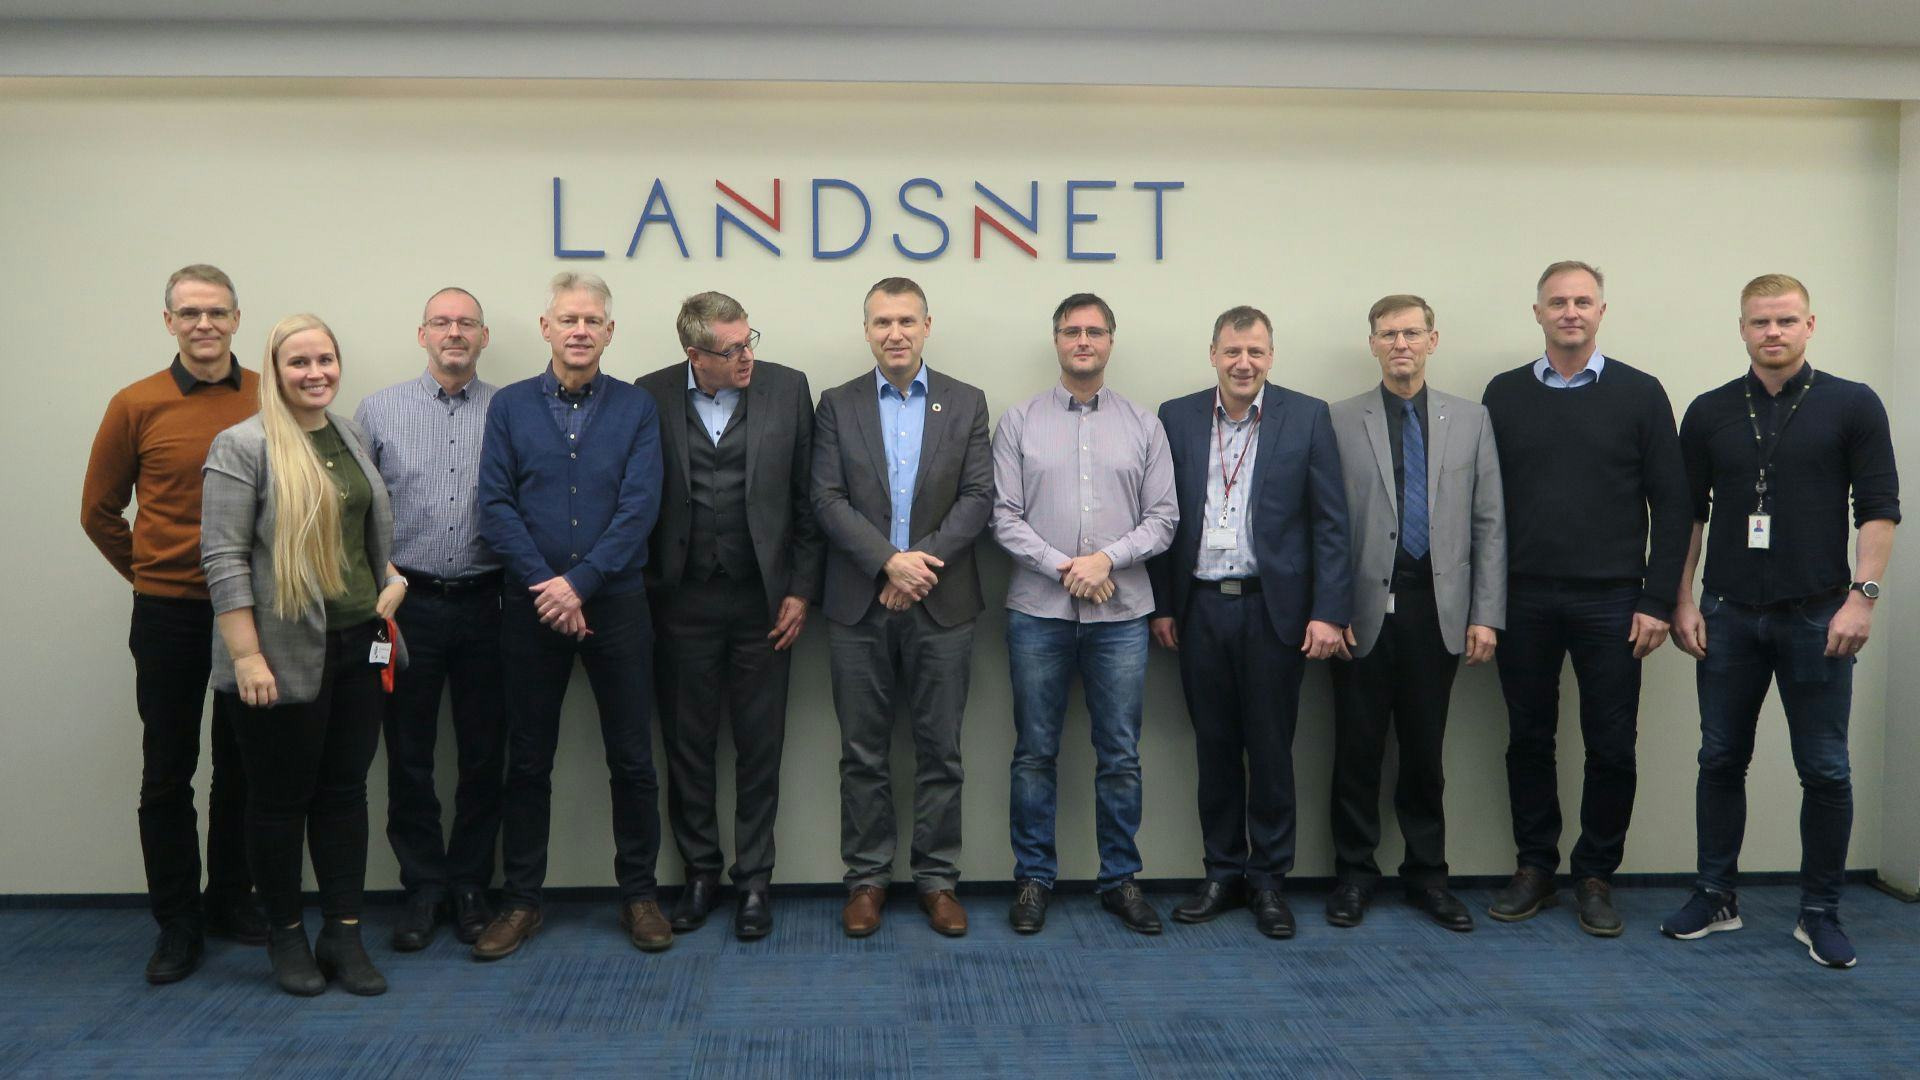 A large group of people standing together against a wall with logo "LANDSNET"